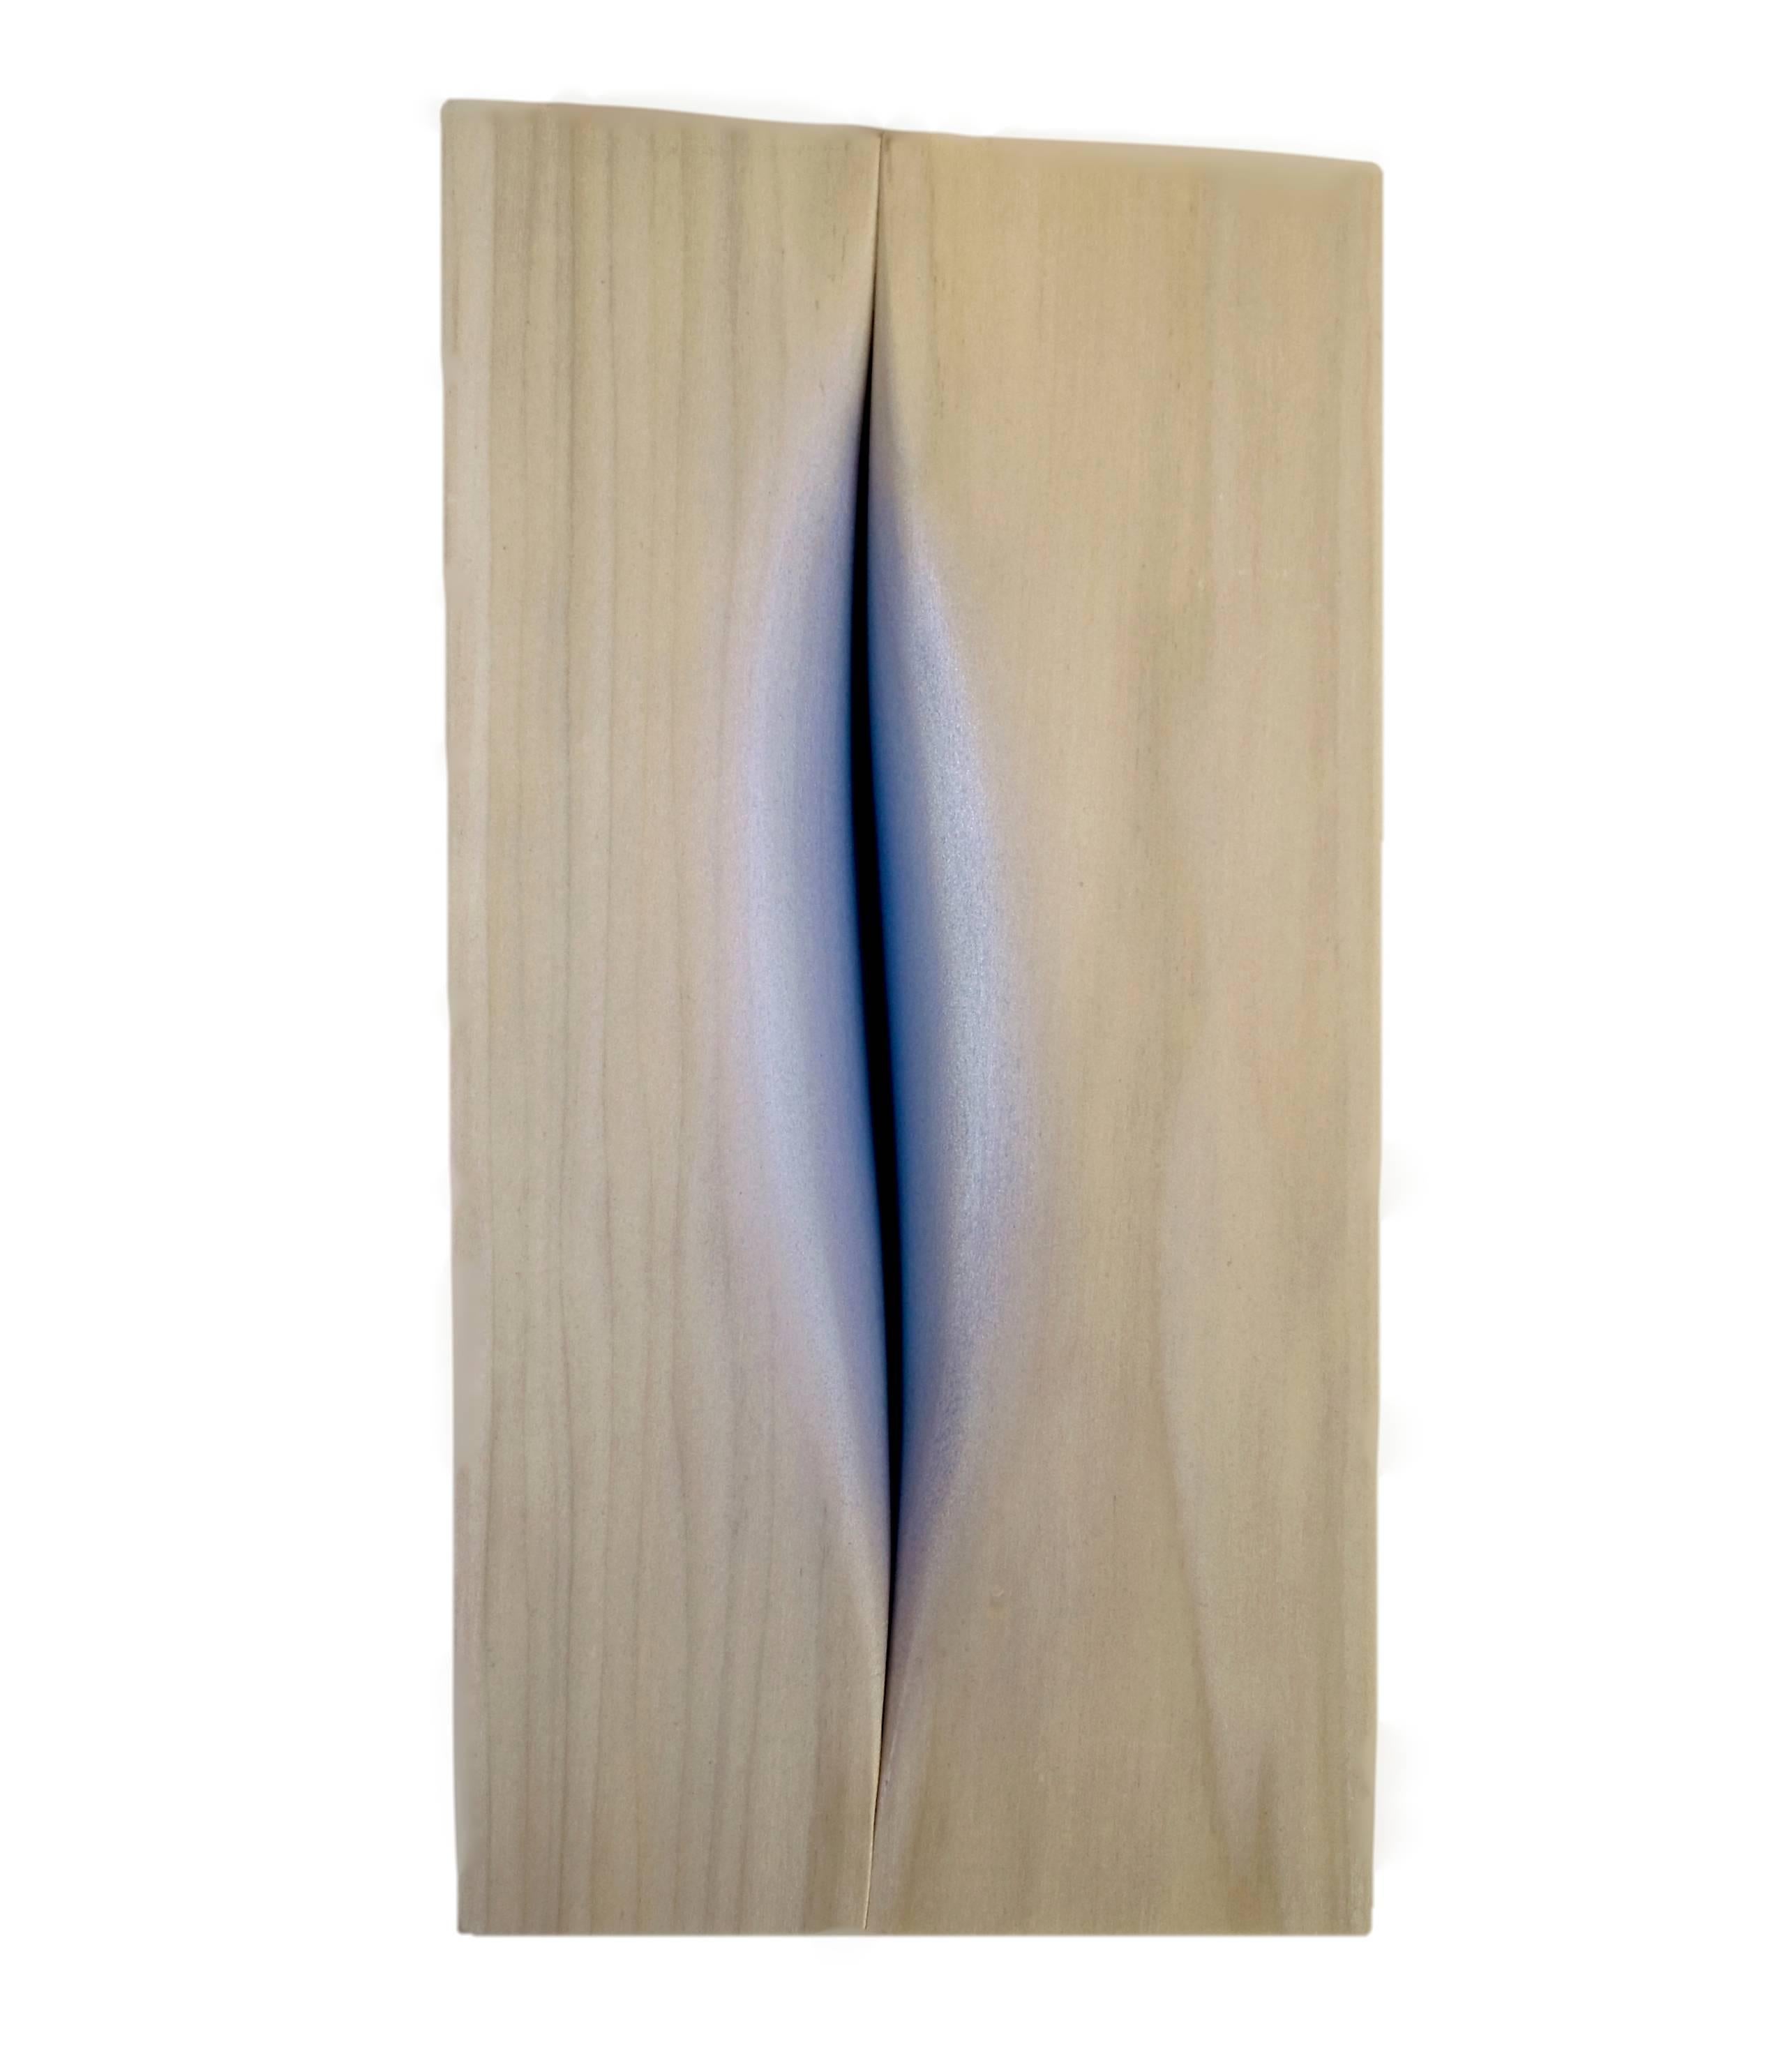 Gregory West Abstract Sculpture - "Unfolding 2" - Abstract Wooden Wall Sculpture